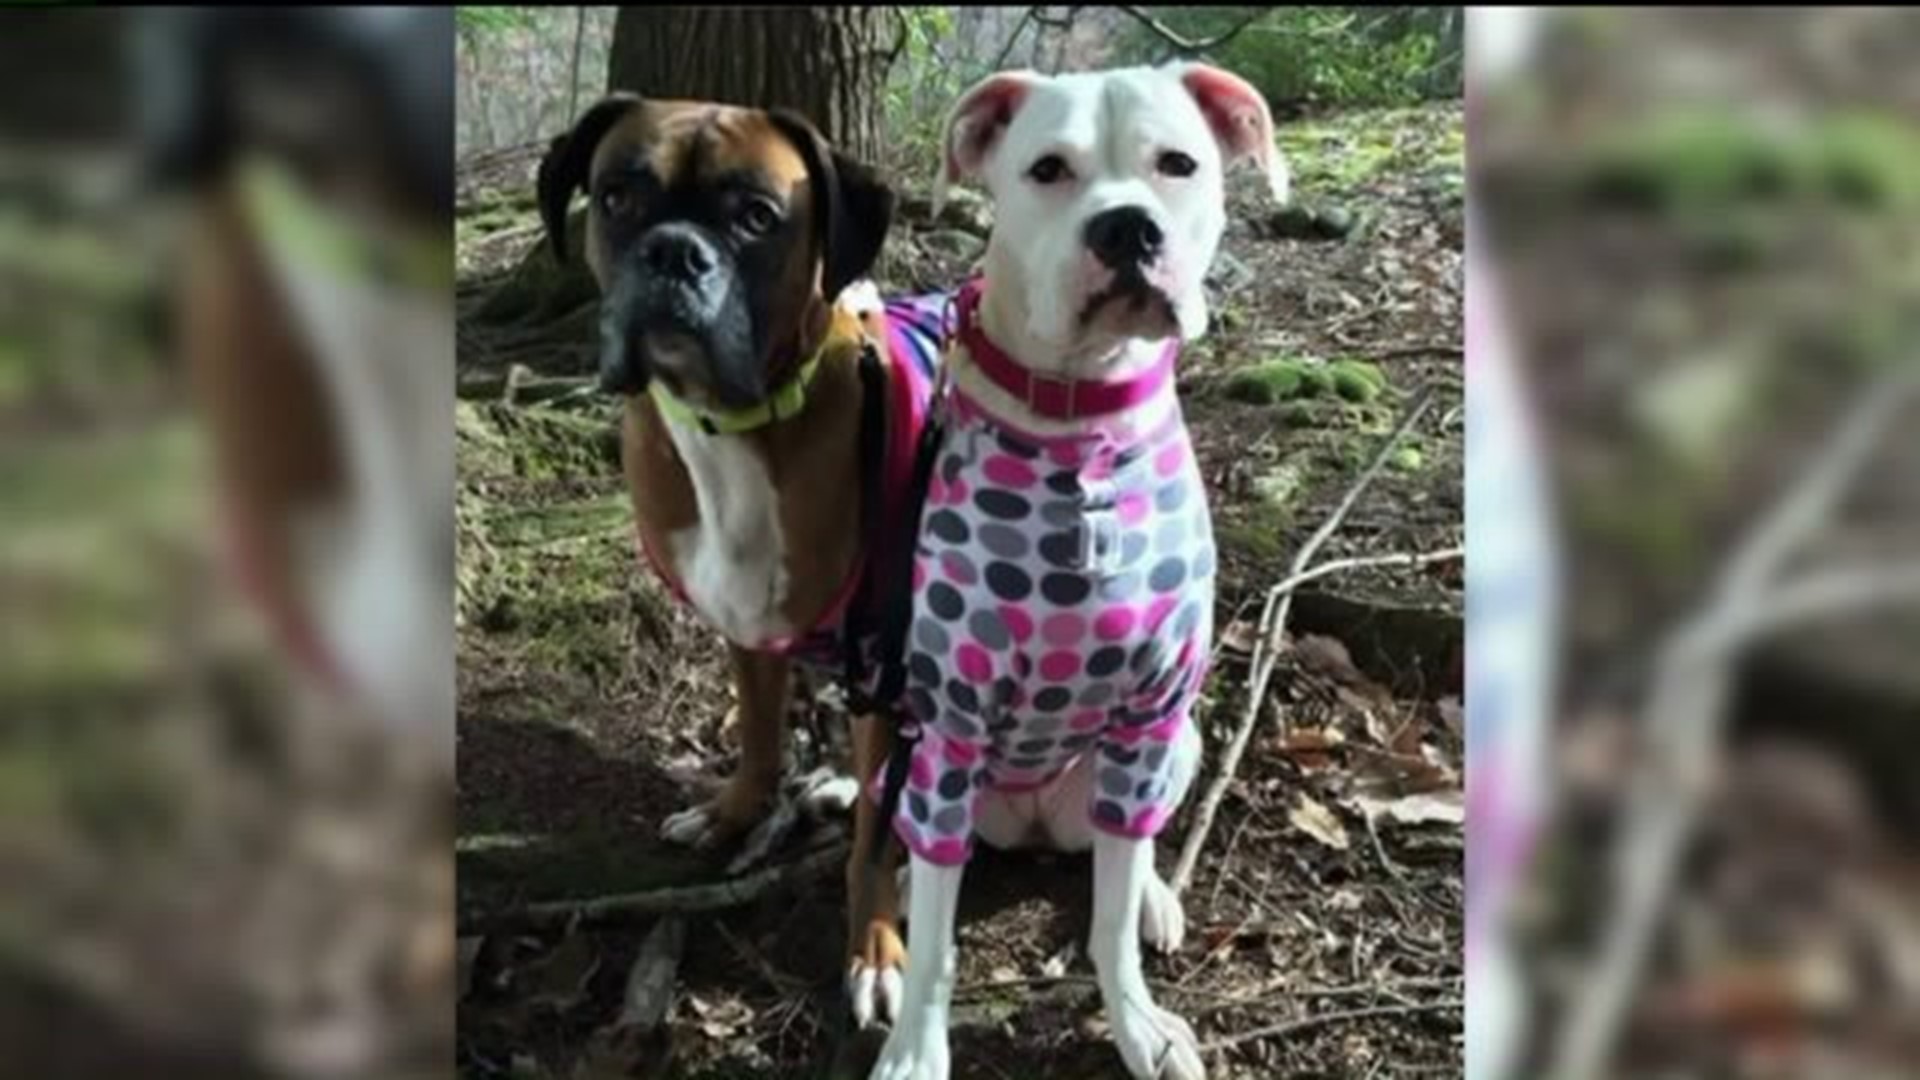 Flood Victims Devastated by Loss of Pets